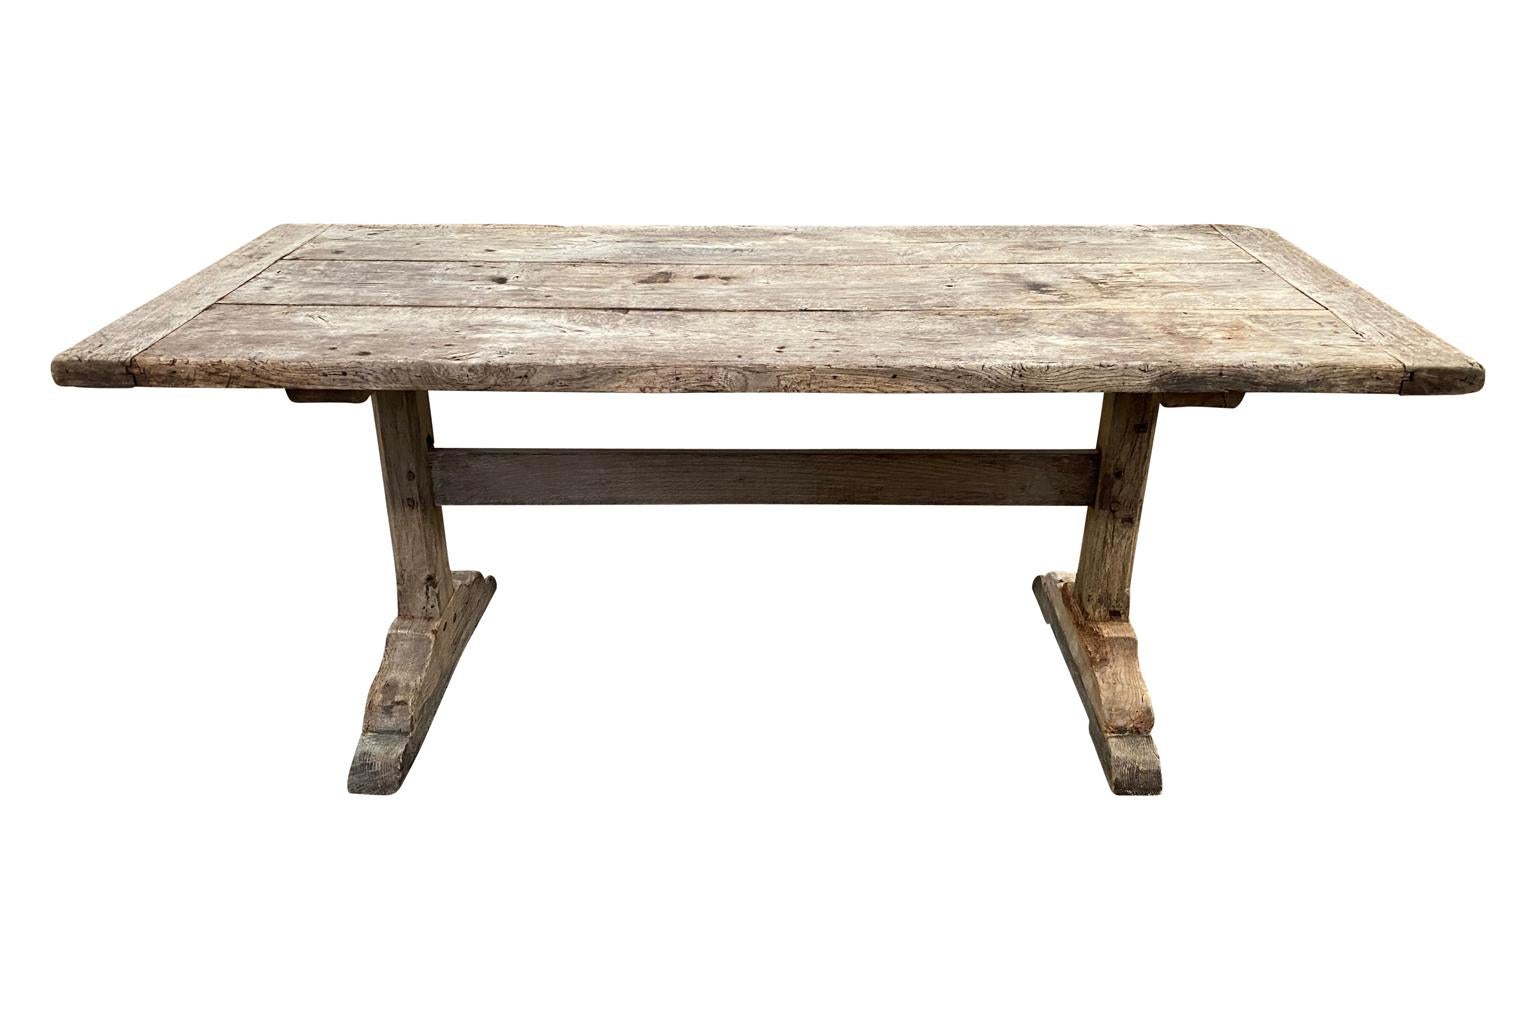 A very handsome mid-19th century farm table - trestle table from the Provence region of France. Soundly constructed from naturally washed oak. Terrific patina. Serves nicely as a writing table as well.